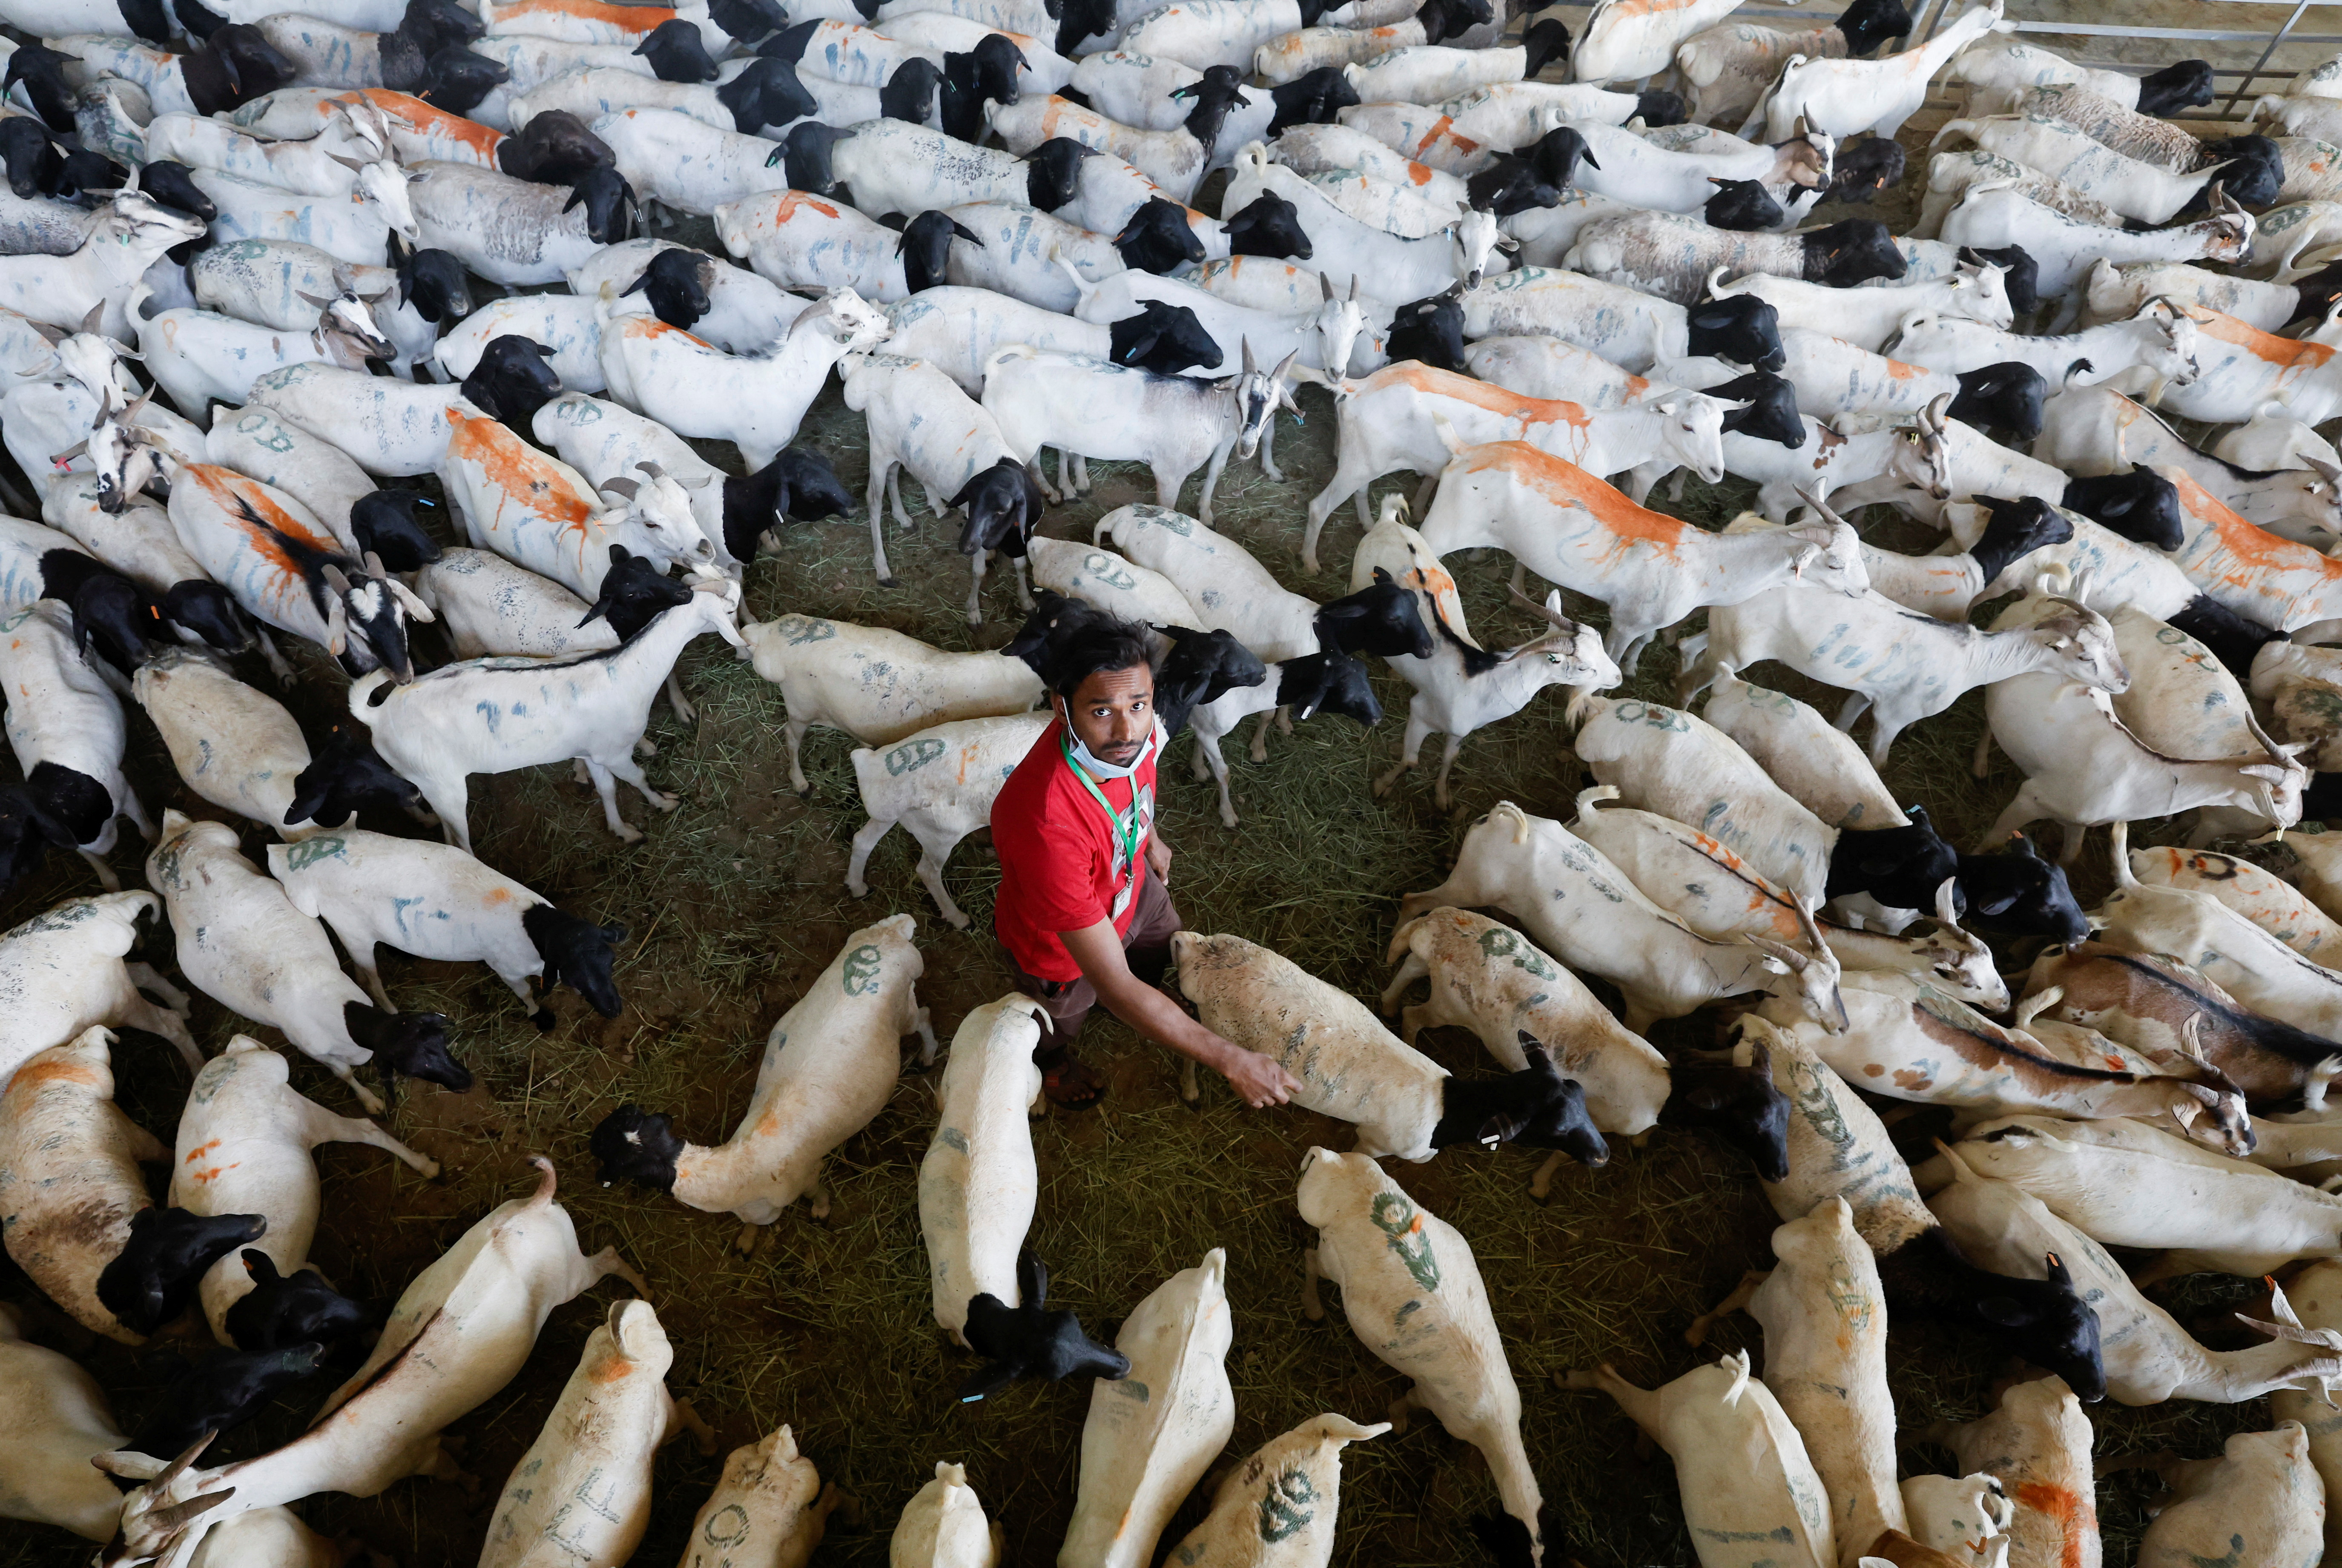 A worker looks on as he prepares sacrificial animals ahead of Eid al-Adha in Mecca